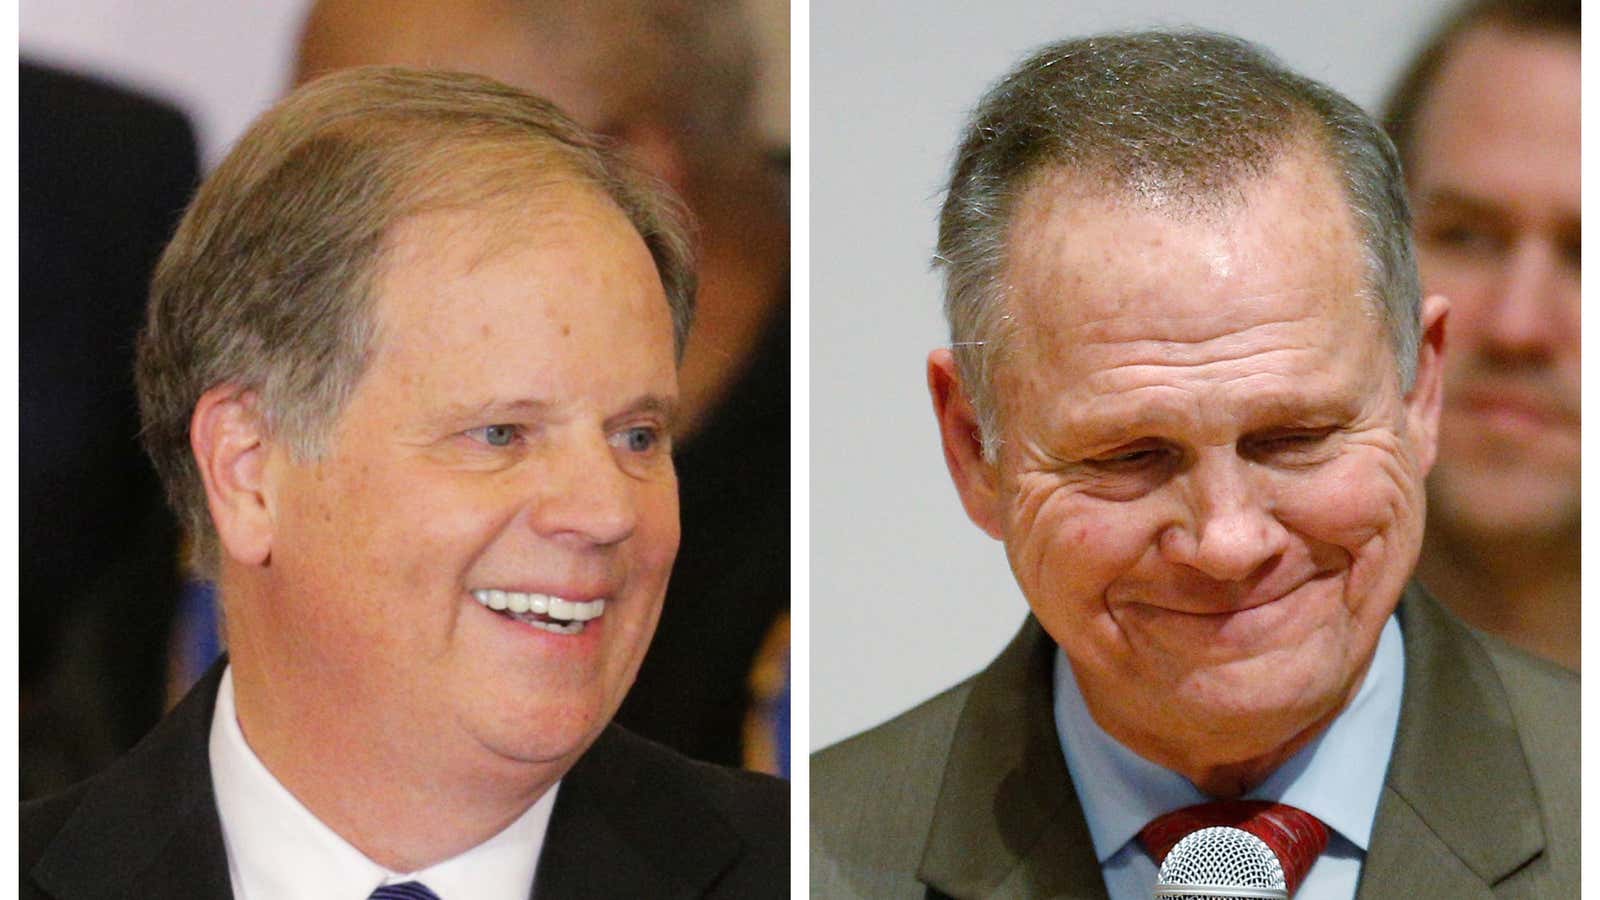 Doug Jones beat Roy Moore by a mere 1.5 percentage points in a state that hasn’t elected a Democrat to the US senate since 1992.